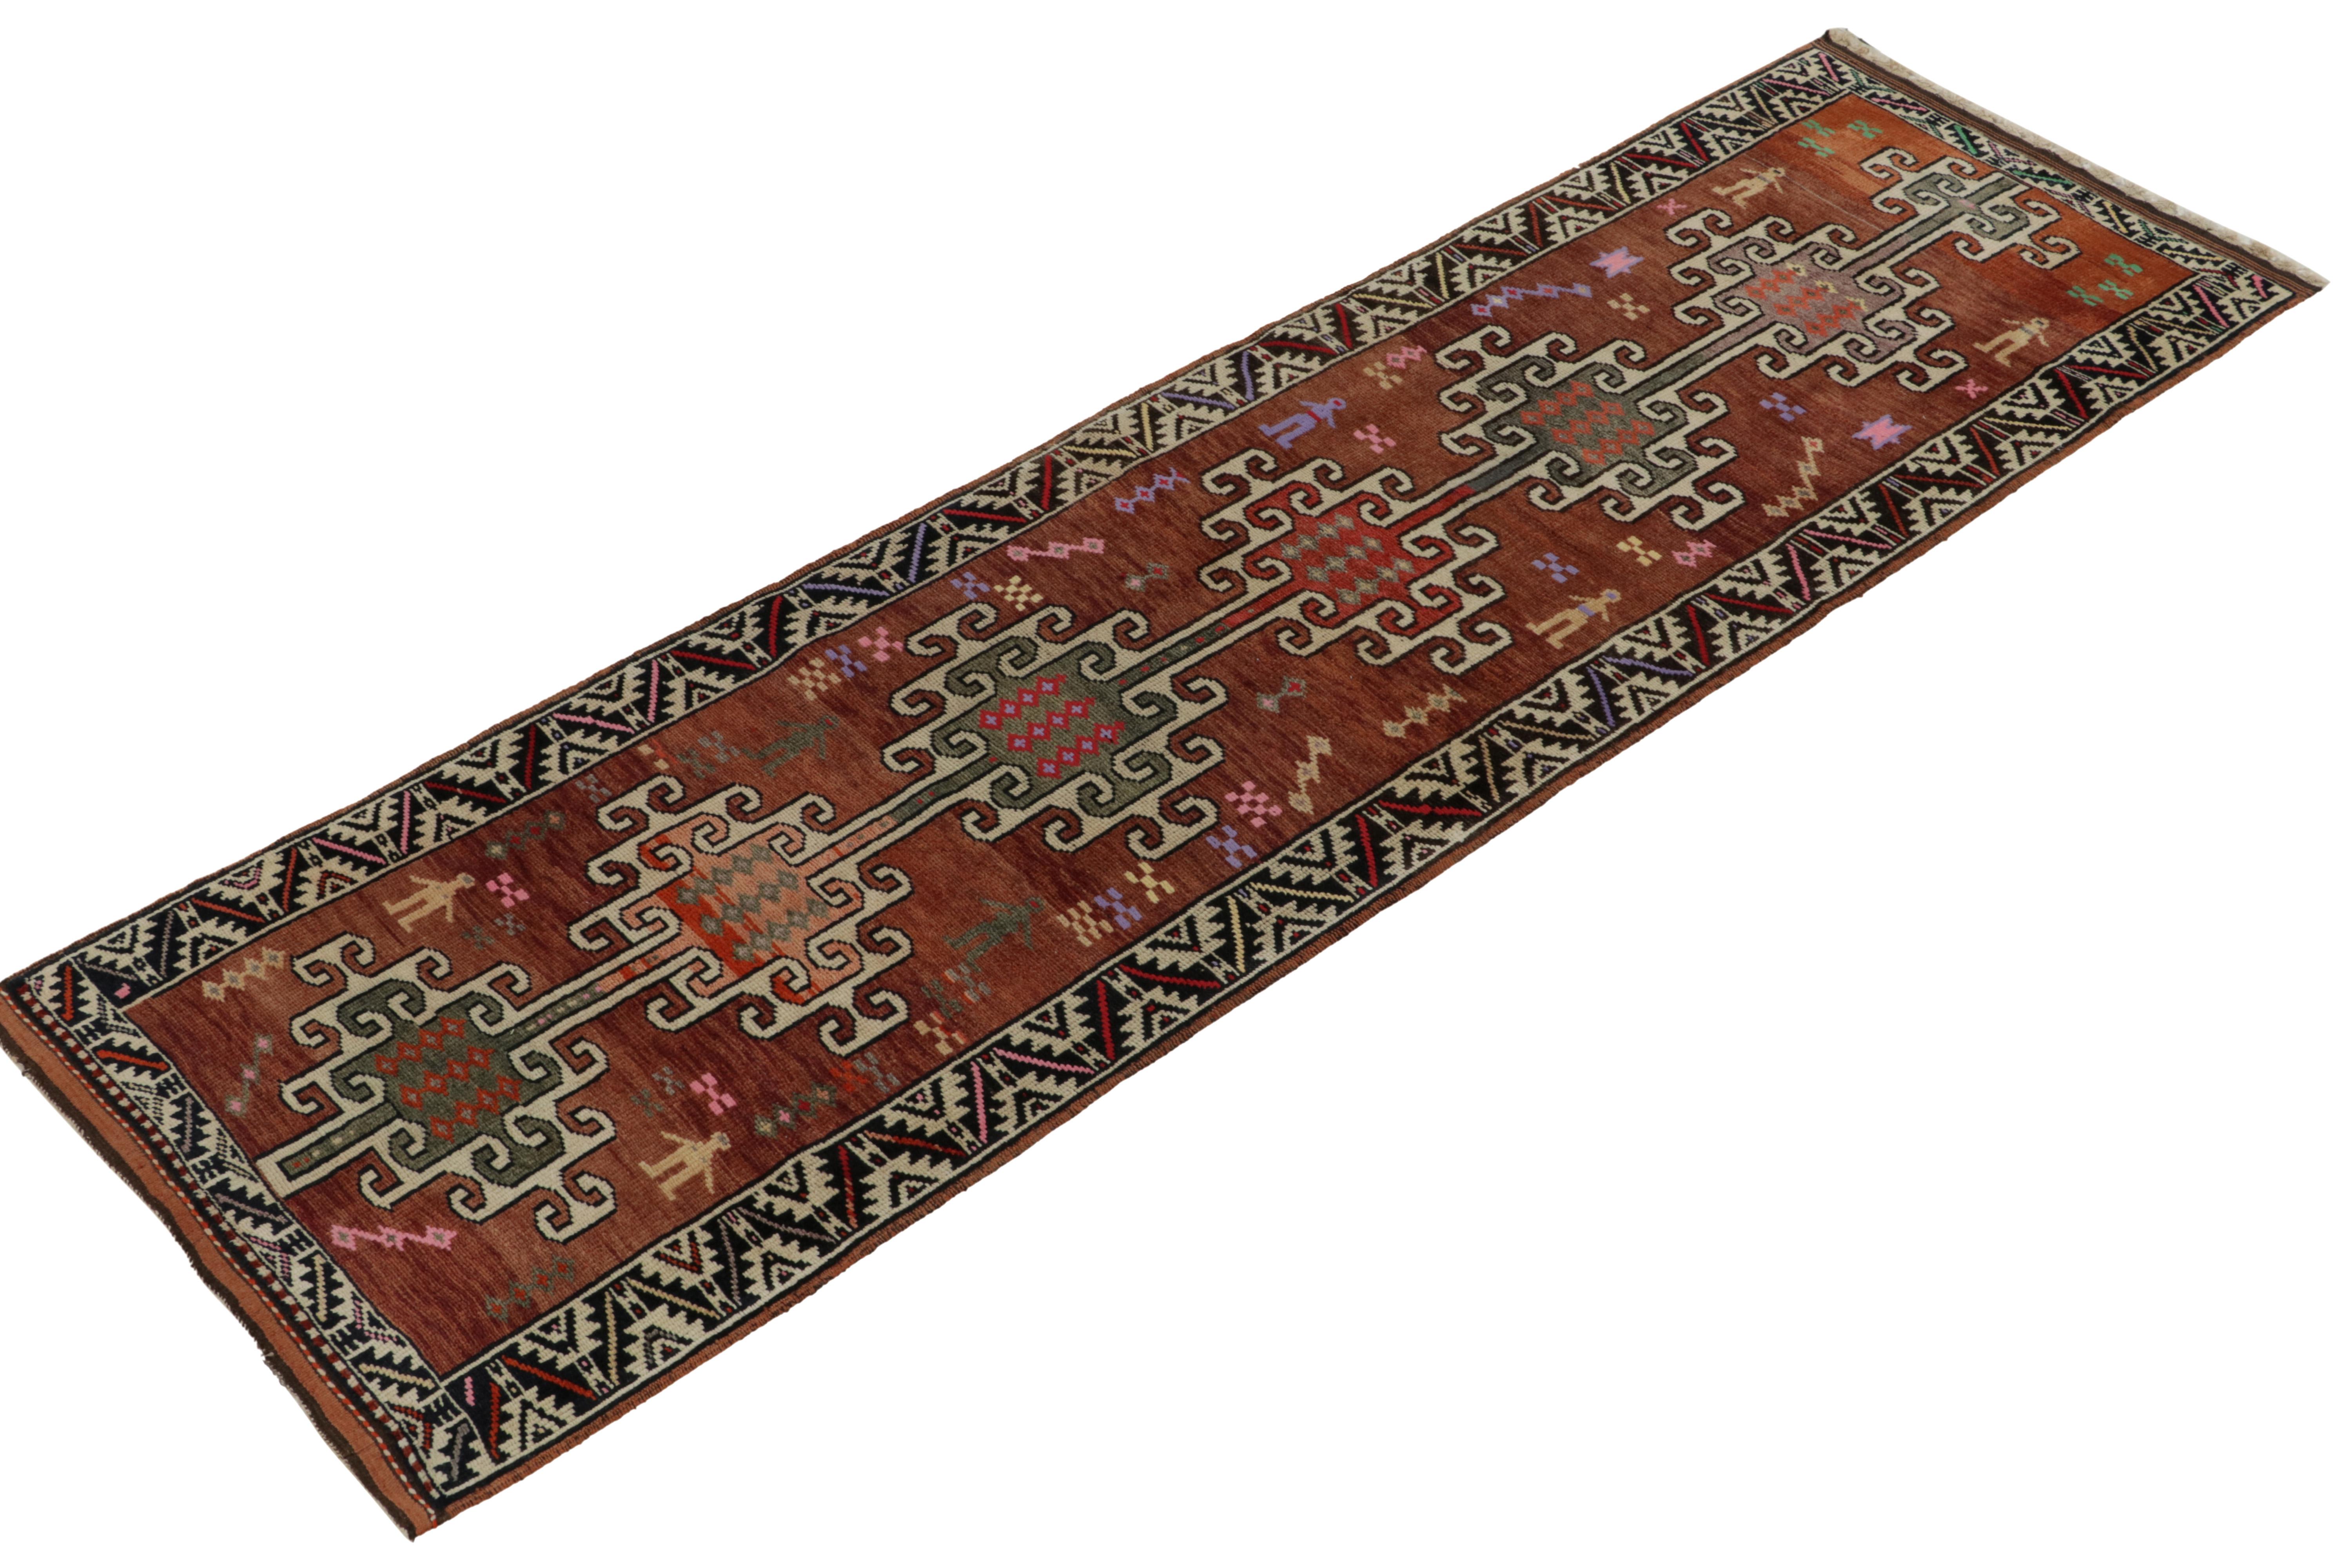 From R&K Principal Josh Nazmiyal’s rare acquisitions, a distinguished 3x11 vintage runner originating from Turkey circa 1950-1960.

On the Design: The symmetric tribal geometric pattern enjoys defined movement in the warmth & richness of brown,